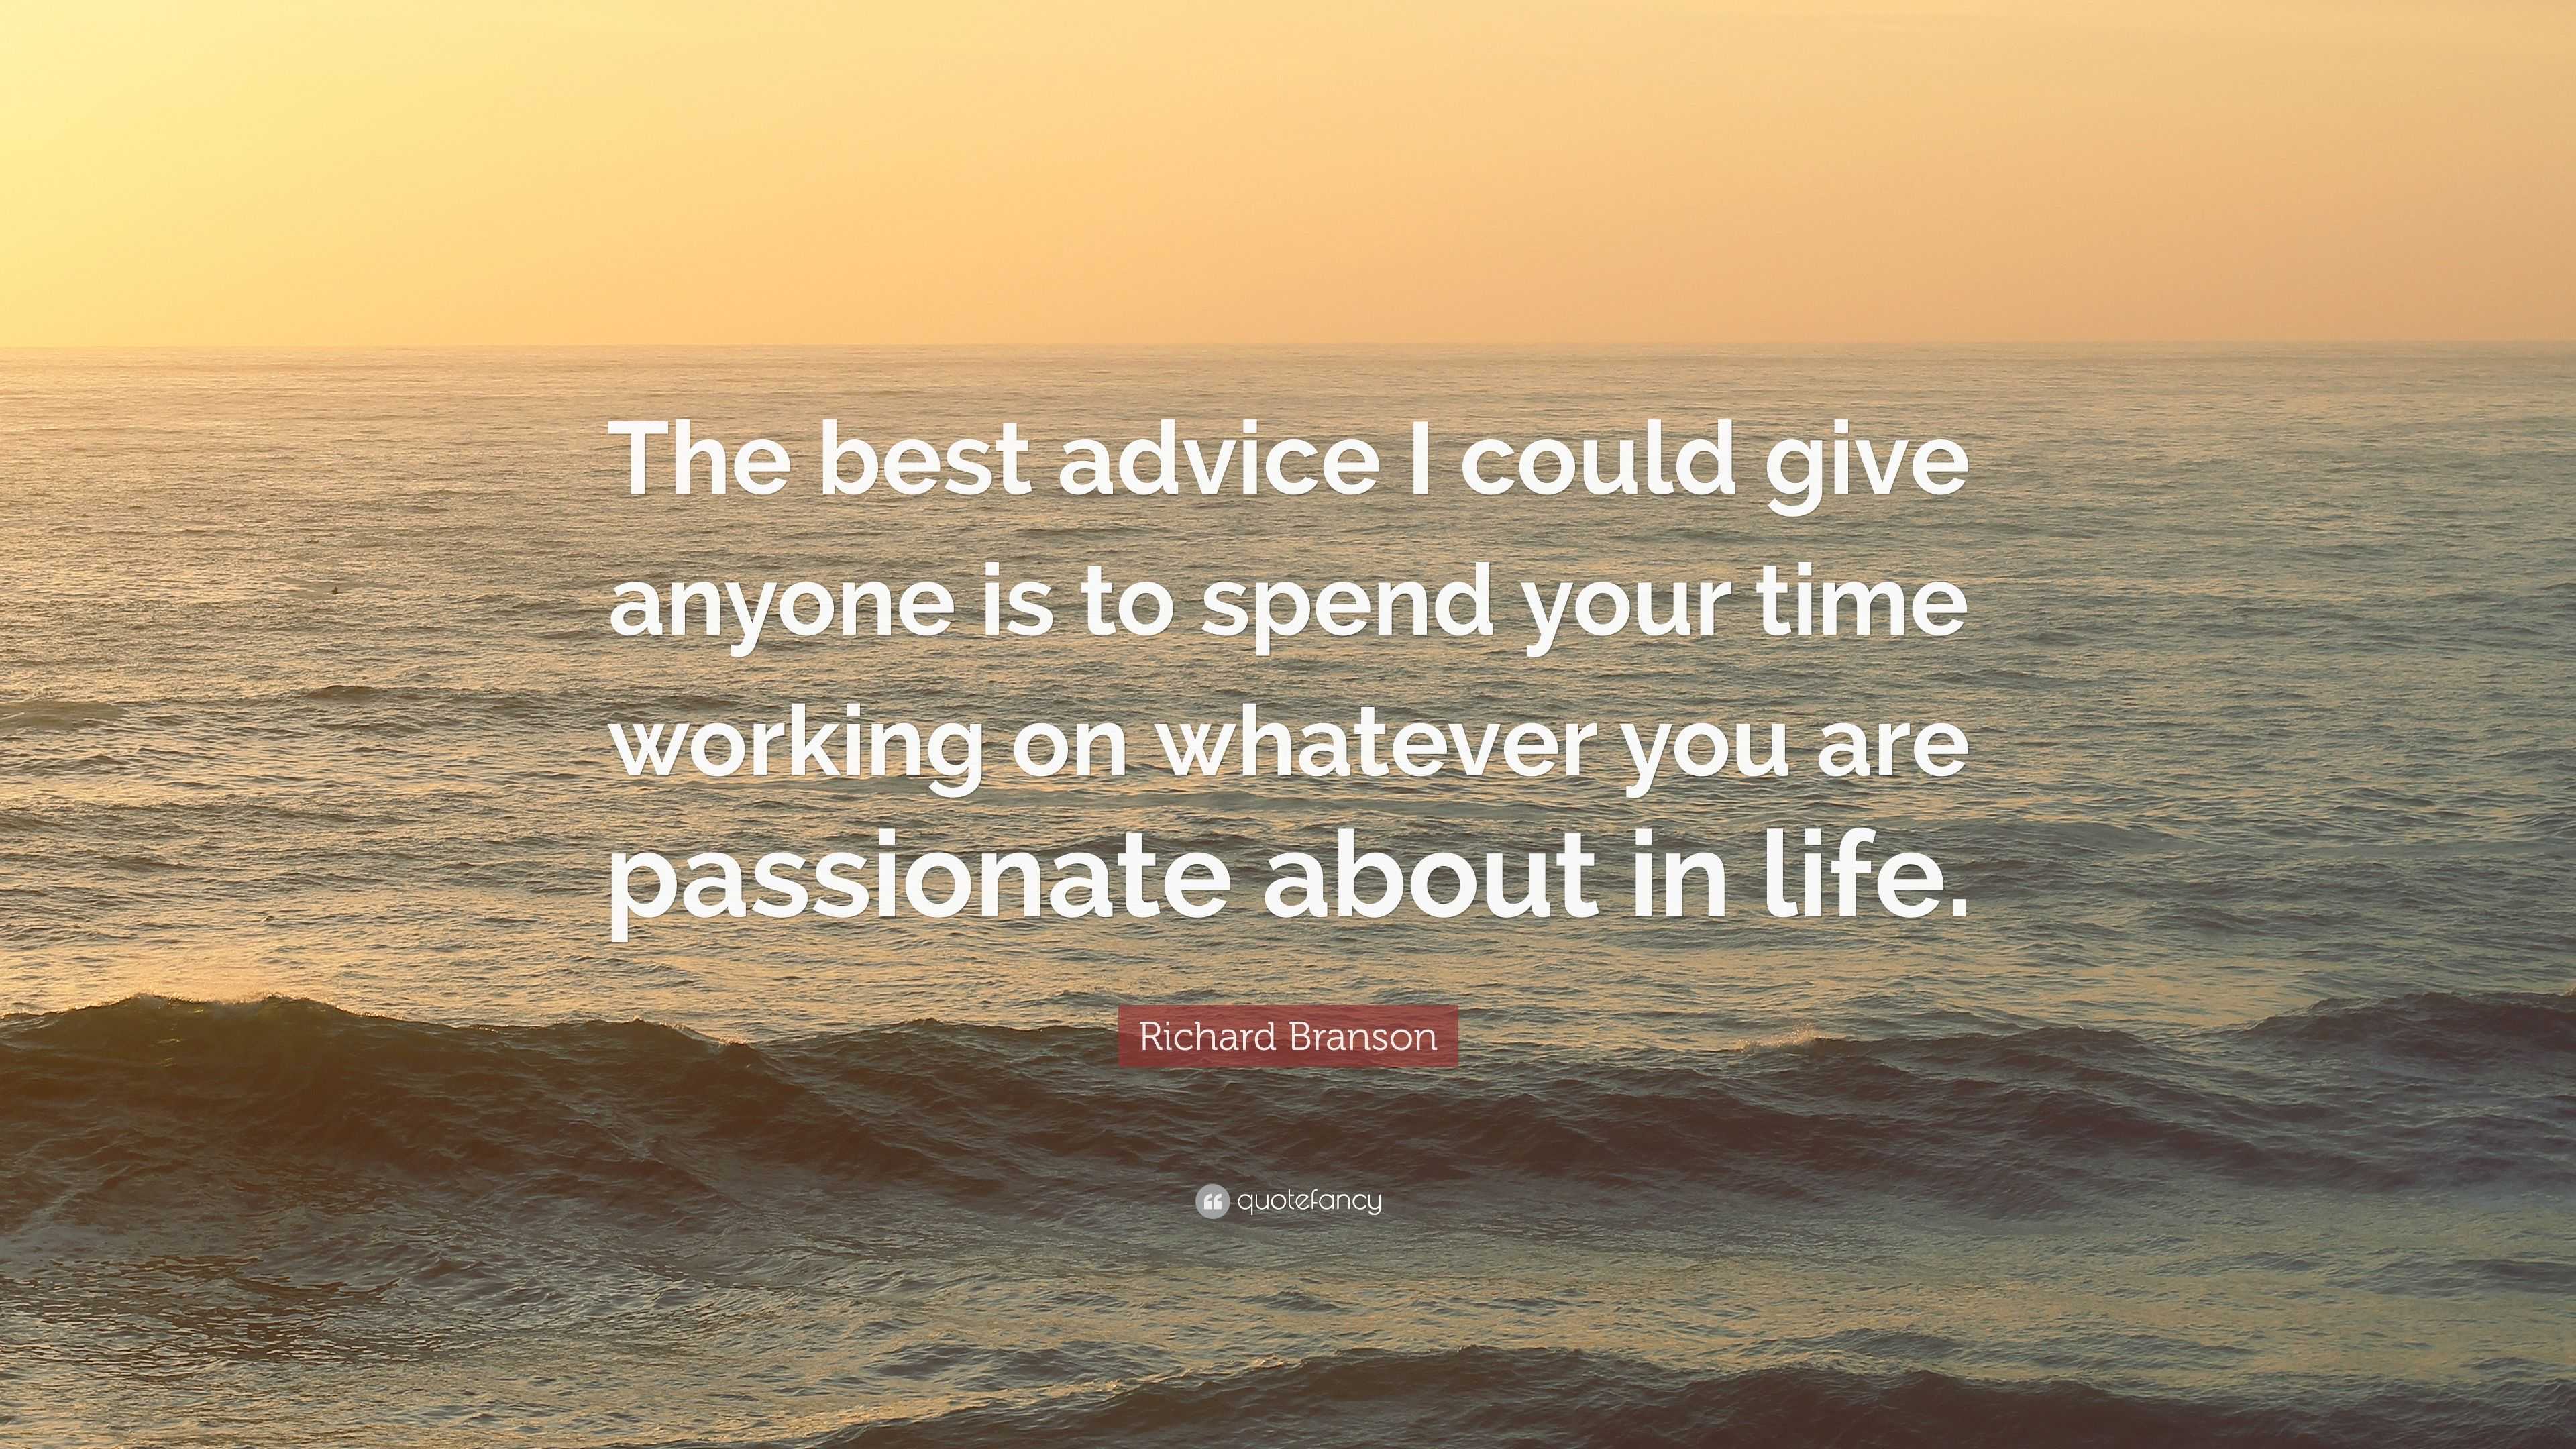 Richard Branson Quote “The best advice I could give anyone is to spend your